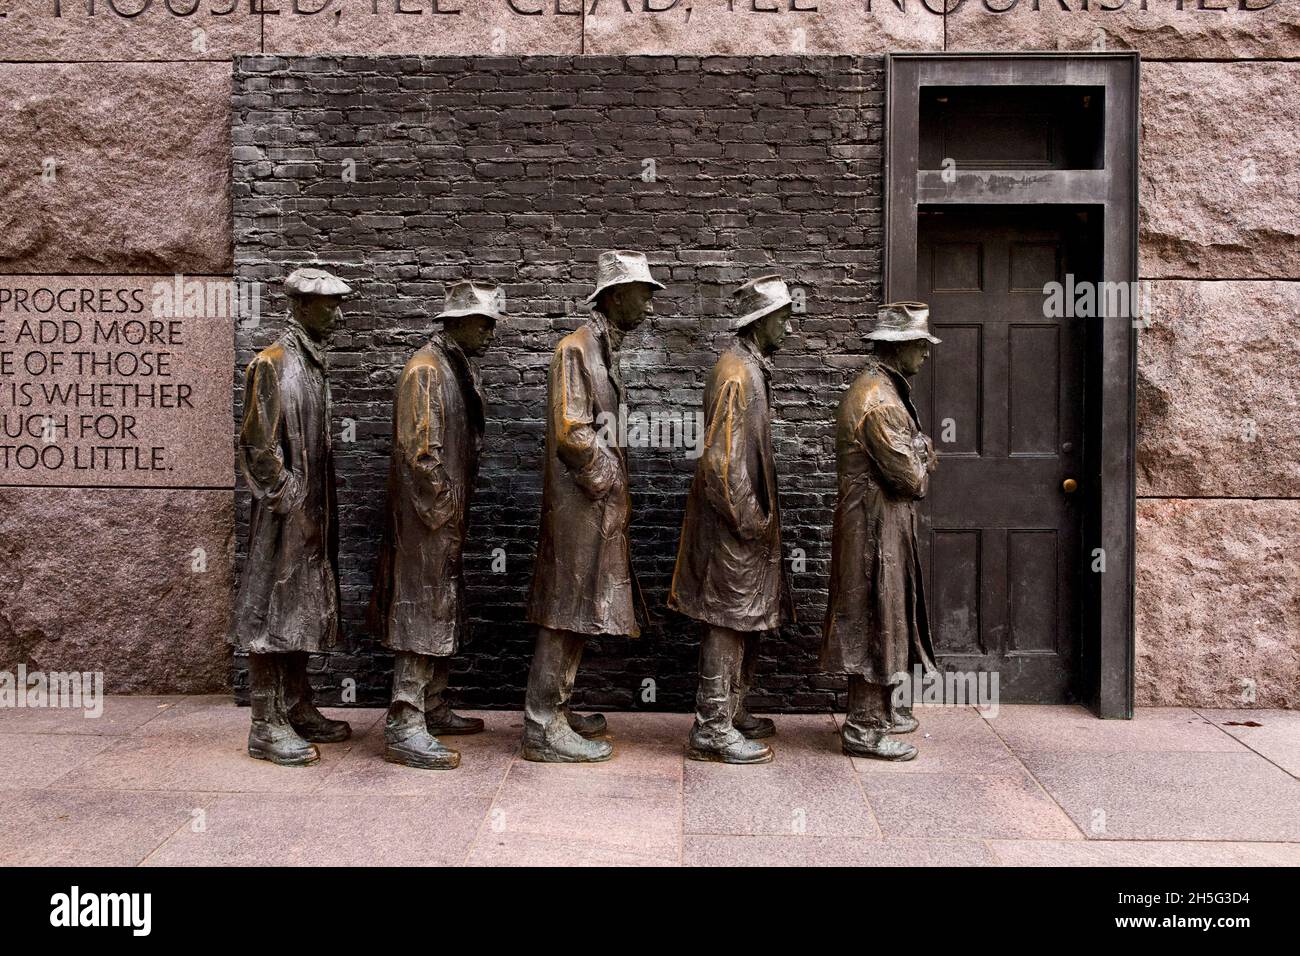 Sculpture by George Segal depicting men in a bread line during the great depression at the FDR Memorial in Washington DC on the National Mall Stock Photo